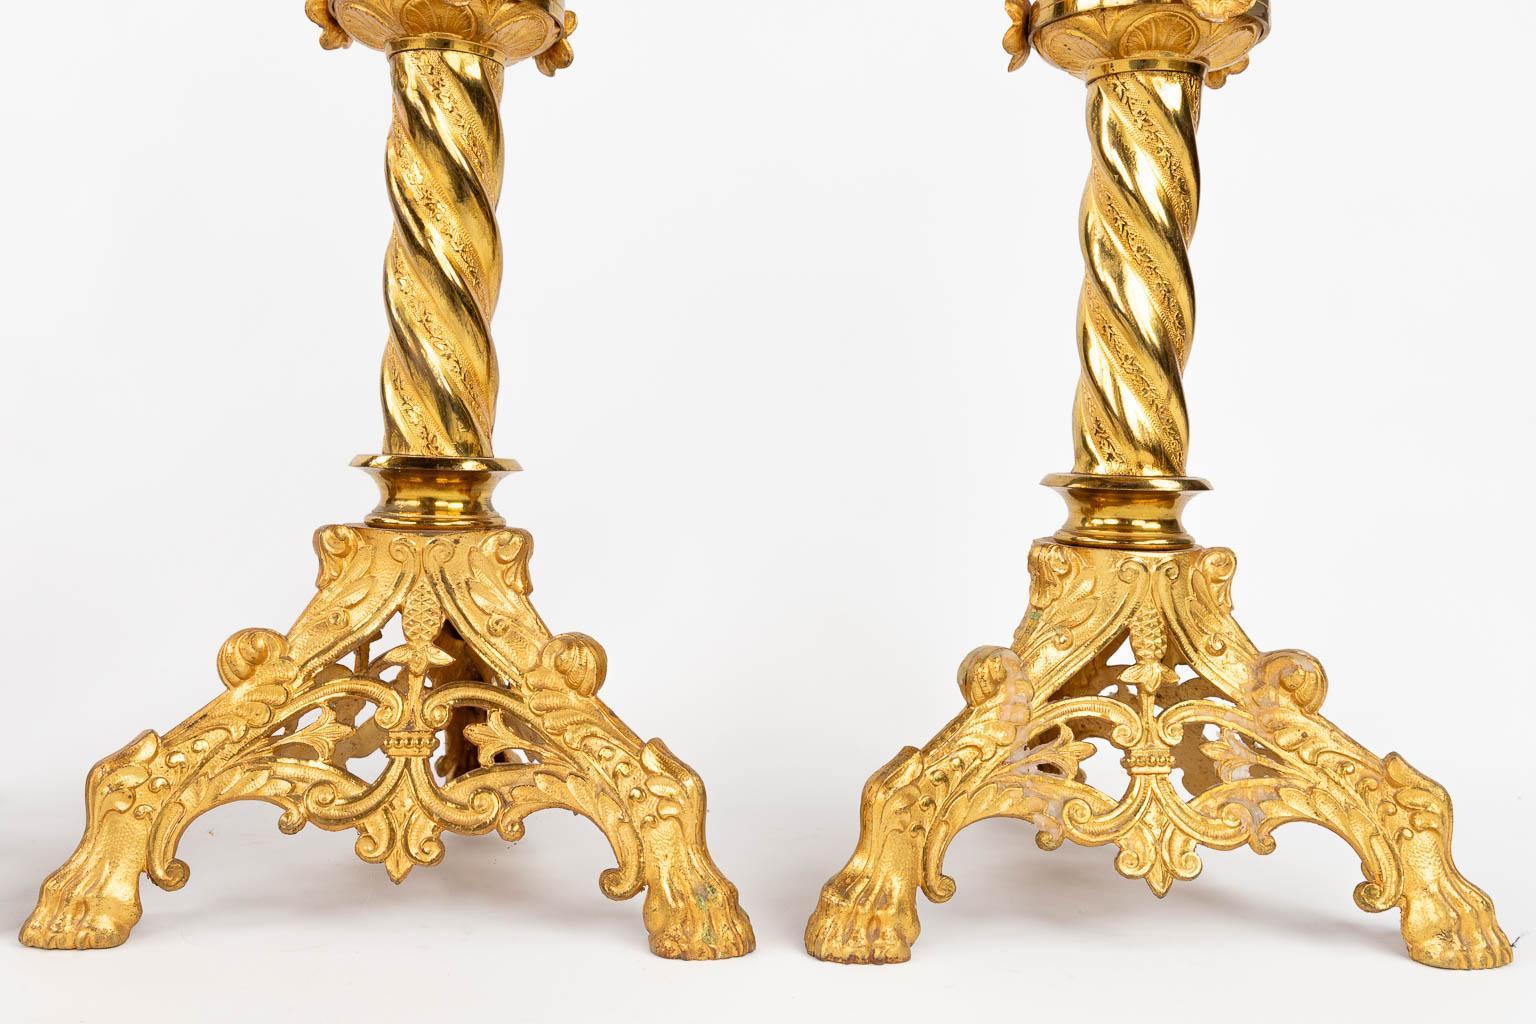 Cast Pair of tiered gilt brass European Gothic Revival pricket candlesticks with Solo For Sale